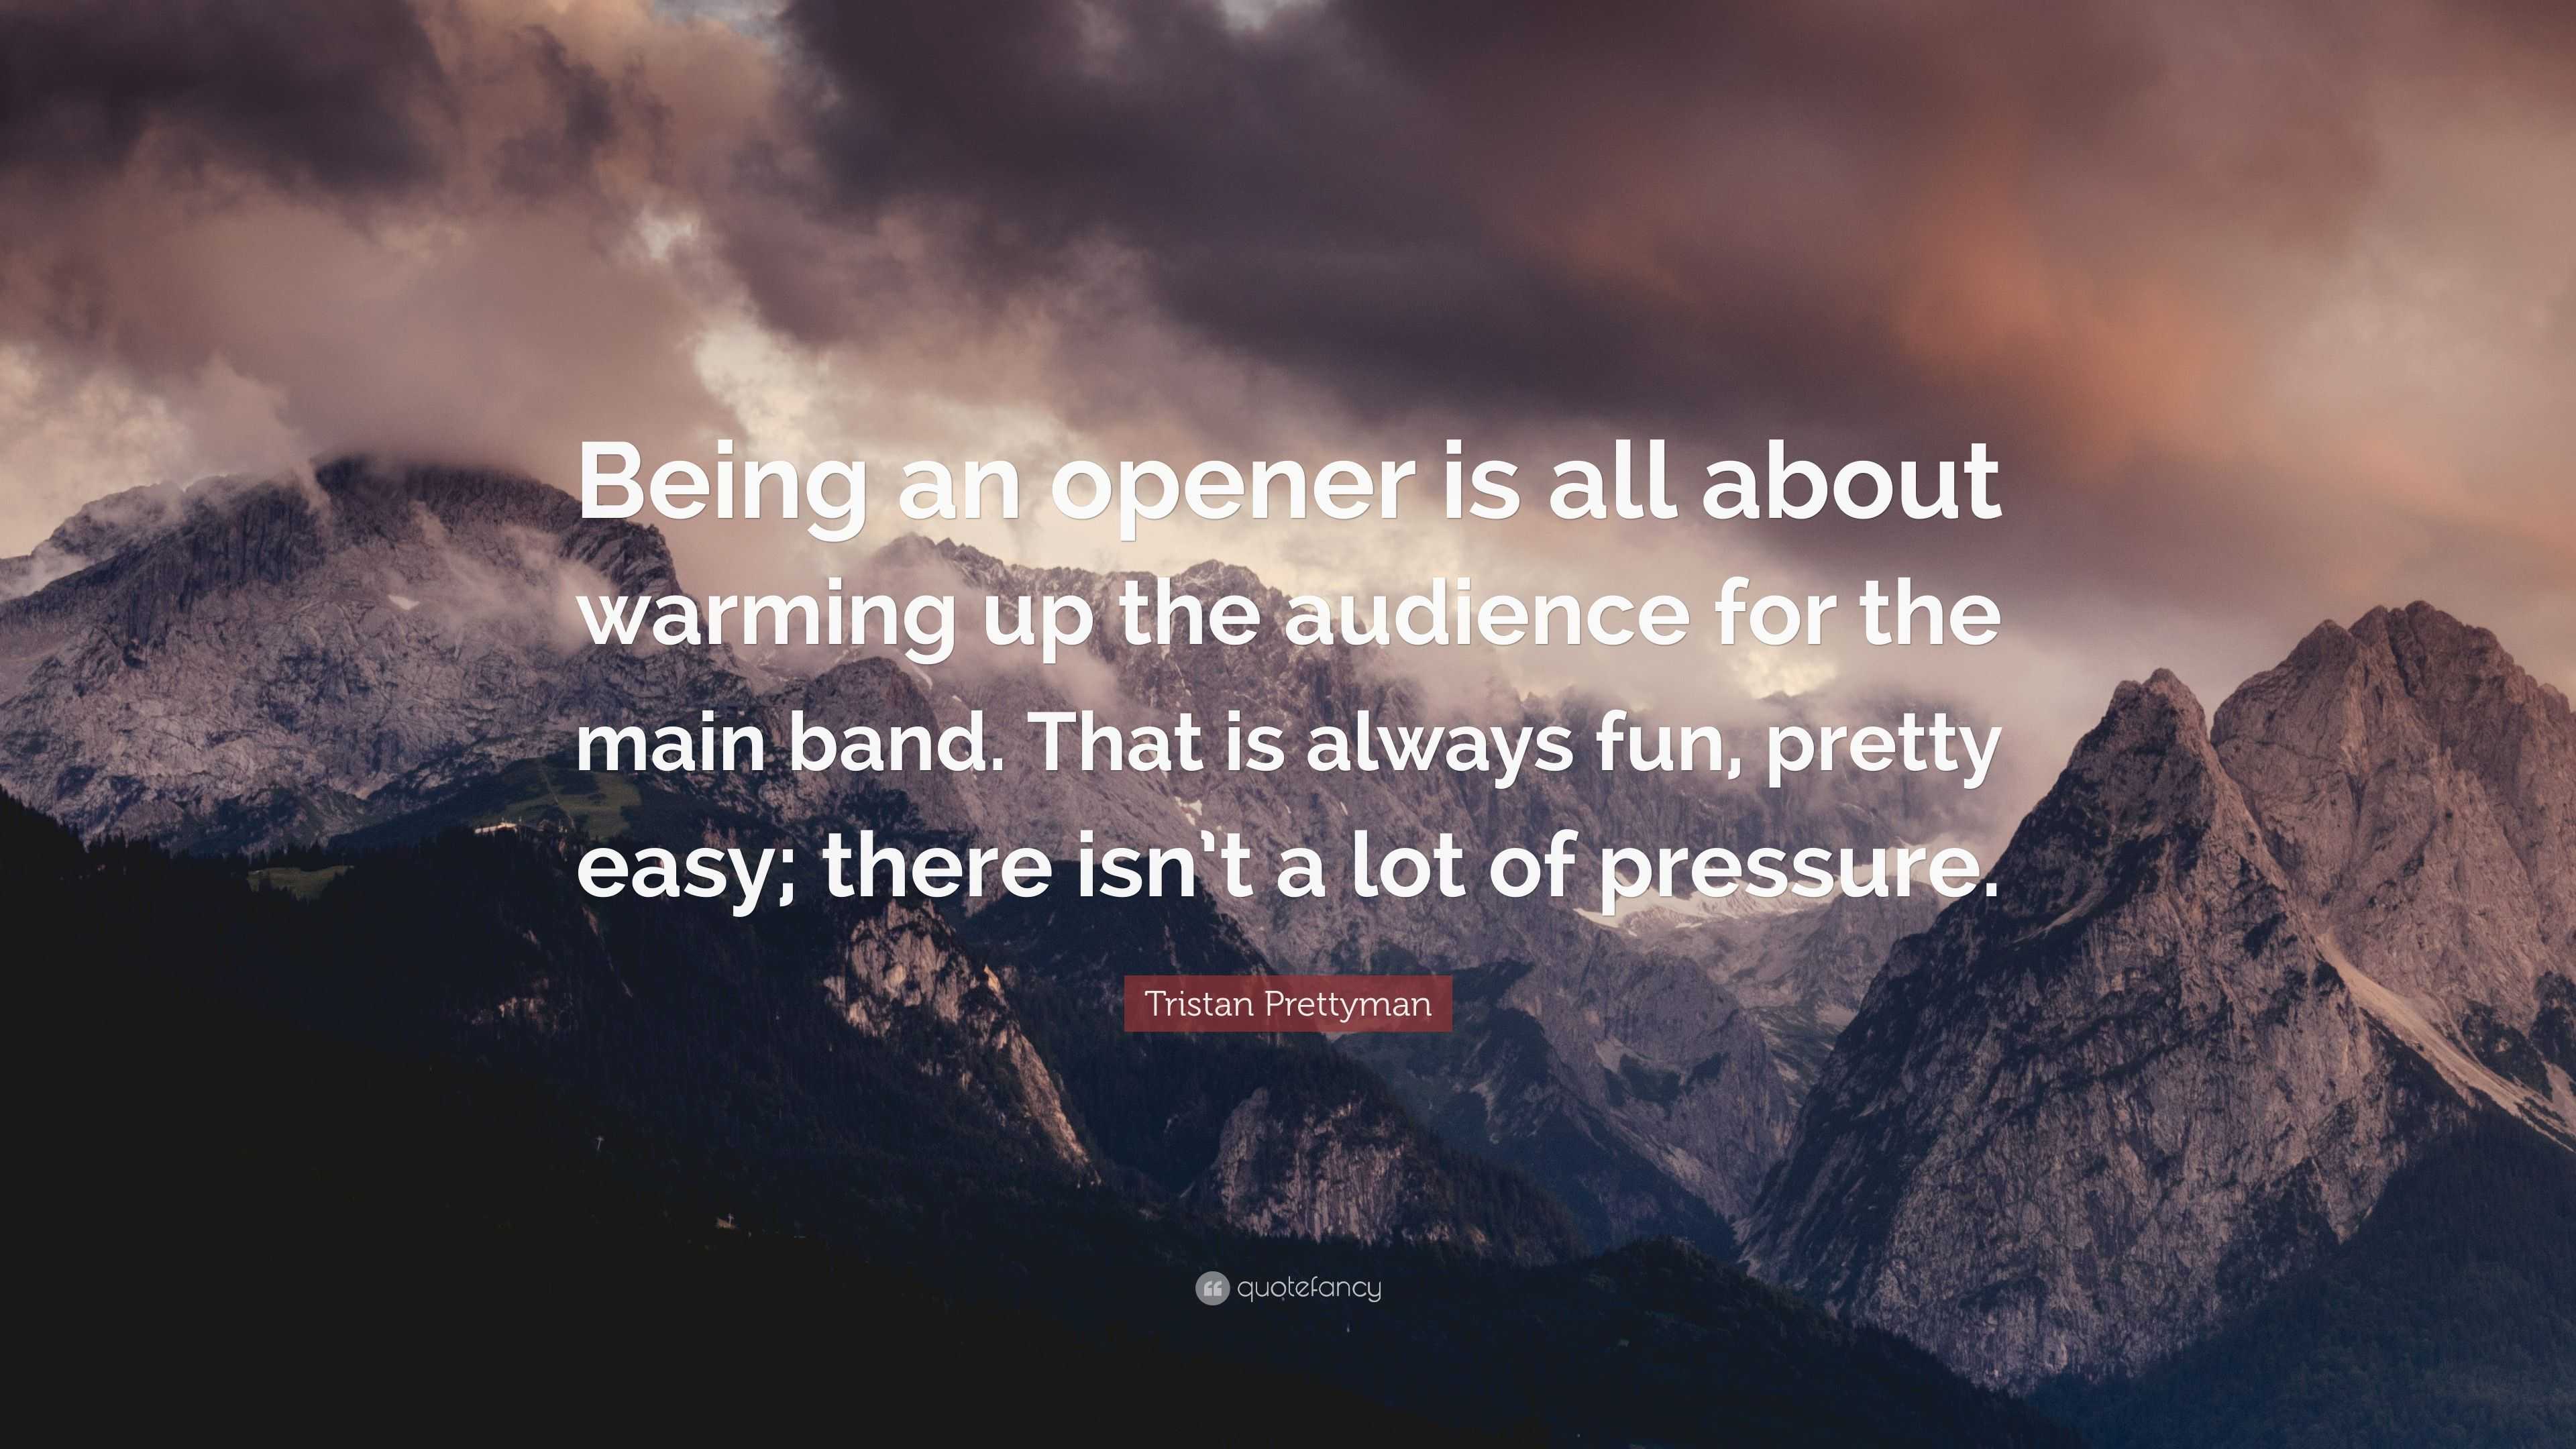 https://quotefancy.com/media/wallpaper/3840x2160/3061503-Tristan-Prettyman-Quote-Being-an-opener-is-all-about-warming-up.jpg